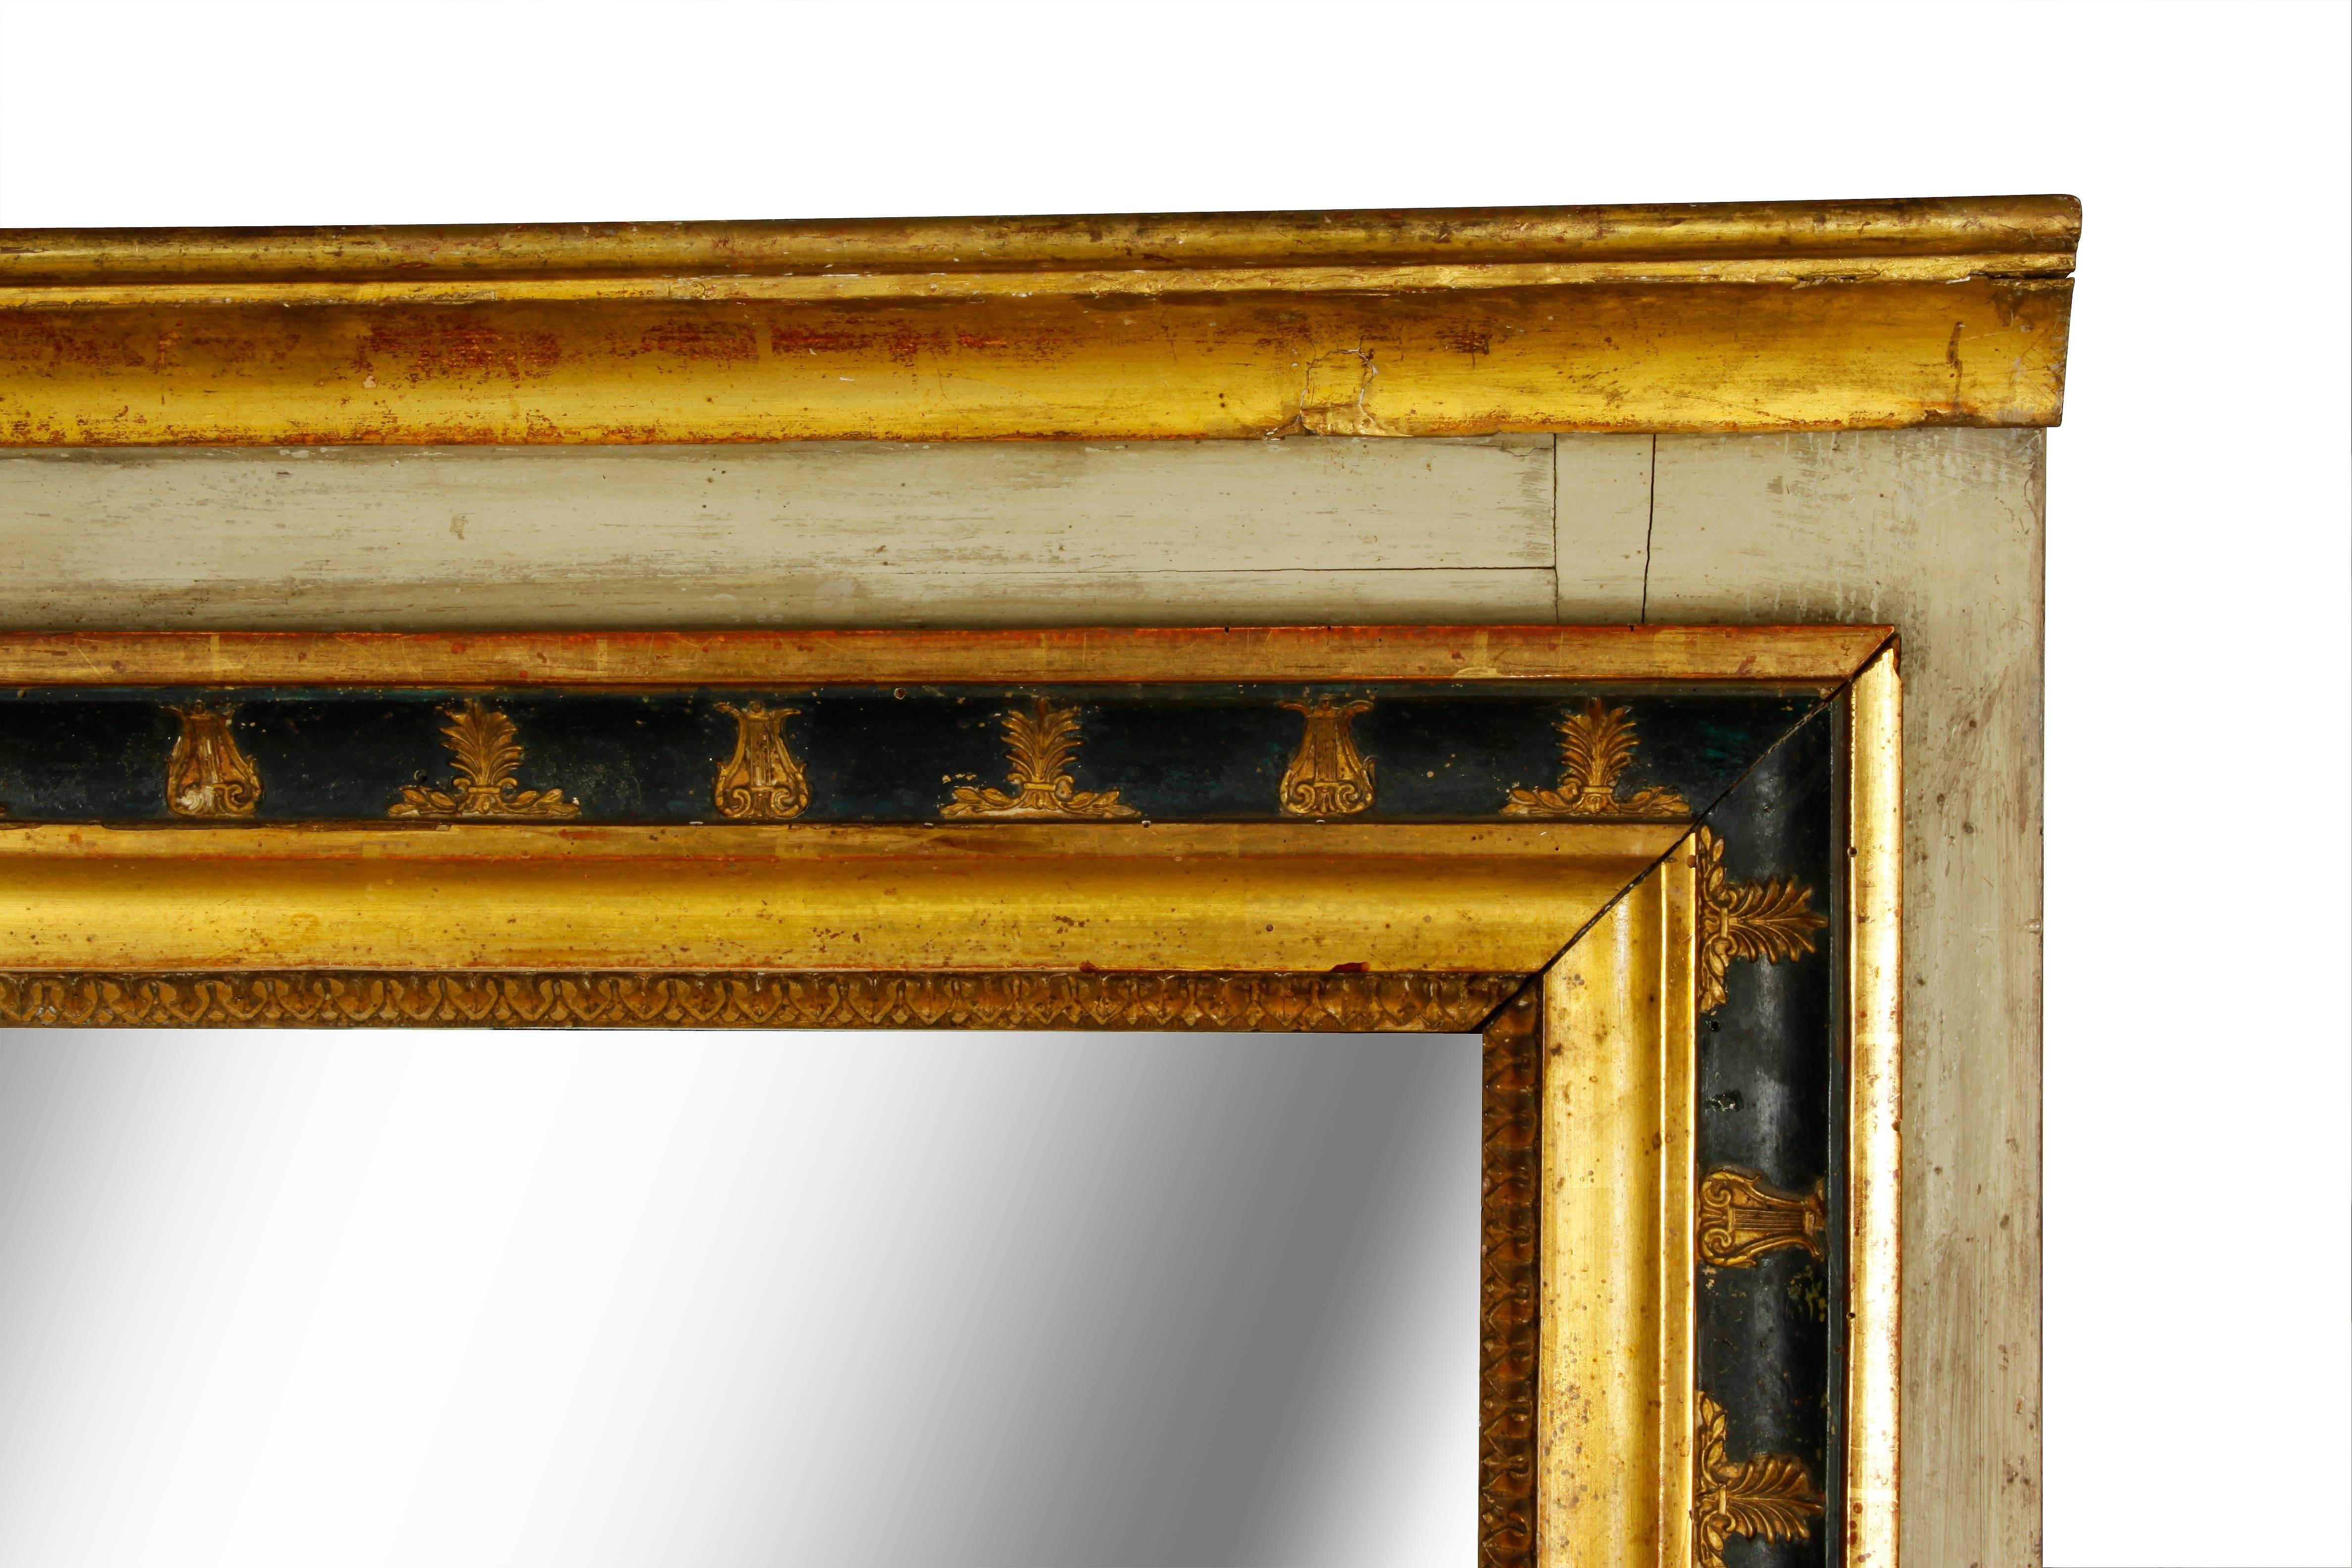 This large painted and parcel-gilt Italian mirror exudes character. The giltwood frame, carved with decorative elements, encloses the glass in two plates. The border, painted black and a gray/green, has faded to a lovely soft patina. A real gem!